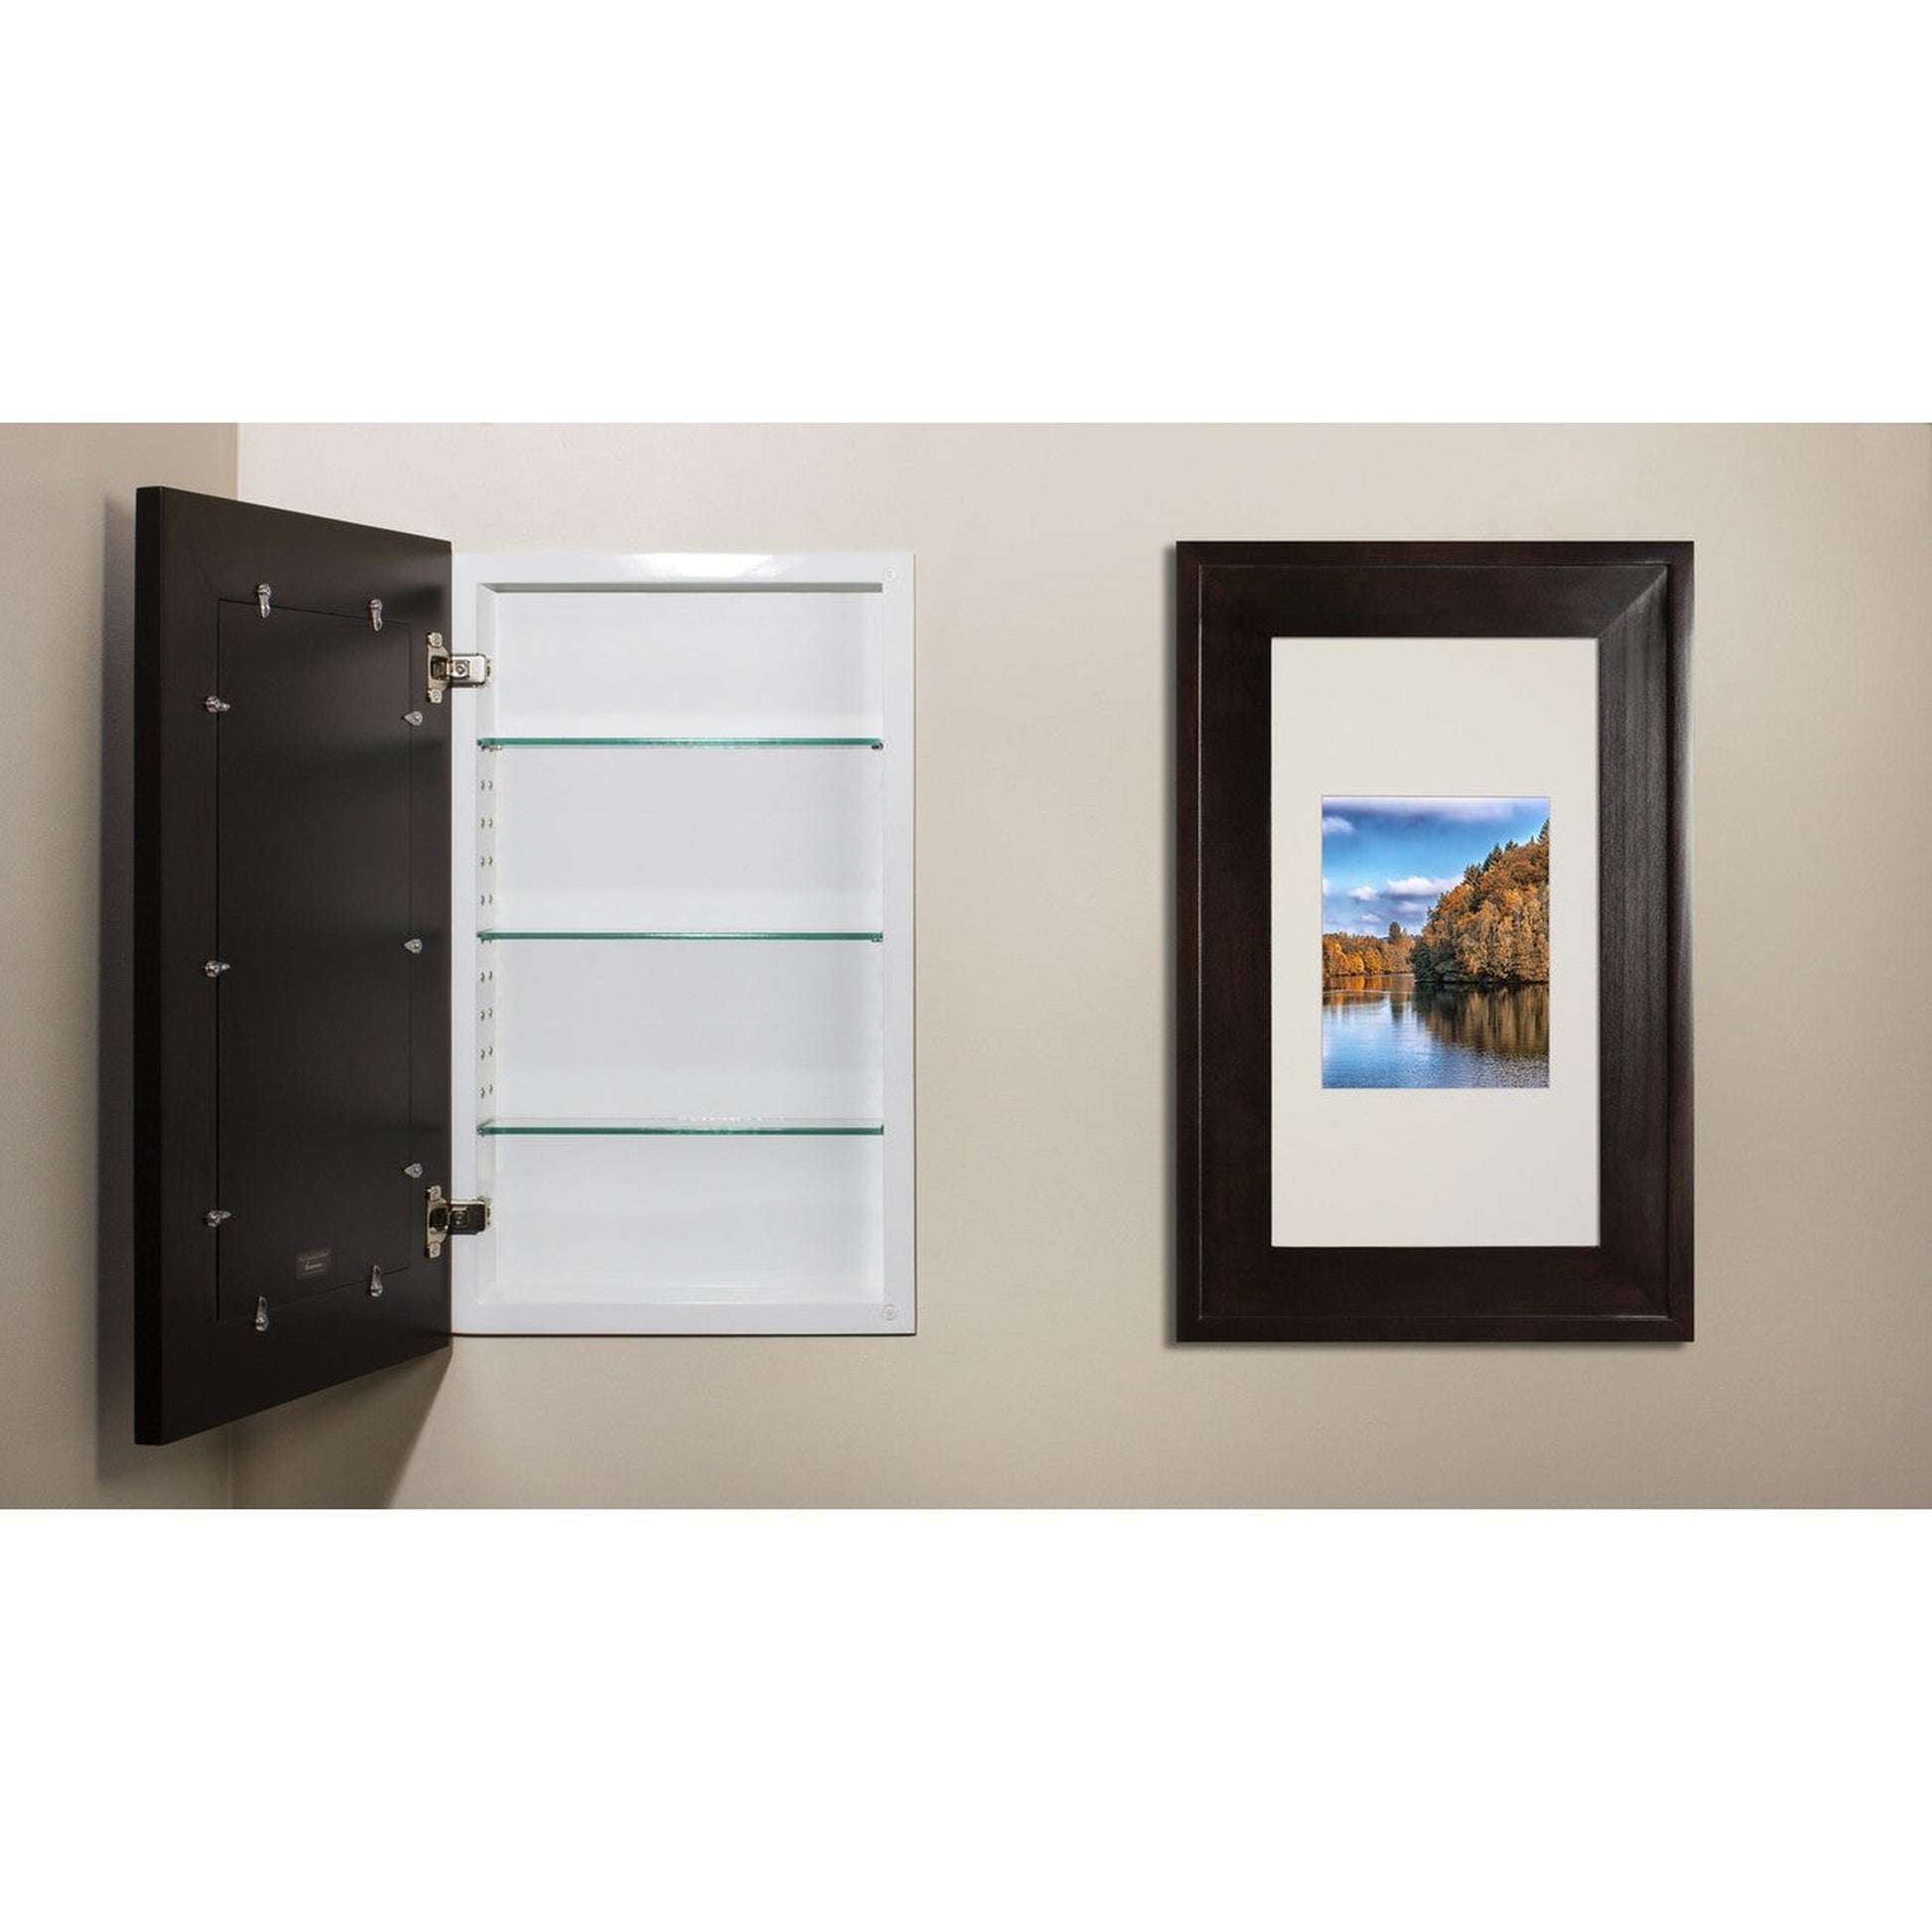 Fox Hollow Furnishings 14" x 24" Coffee Bean Extra Large White Interior Special 3" Depth Recessed Picture Frame Medicine Cabinet With White Three Opening Matting